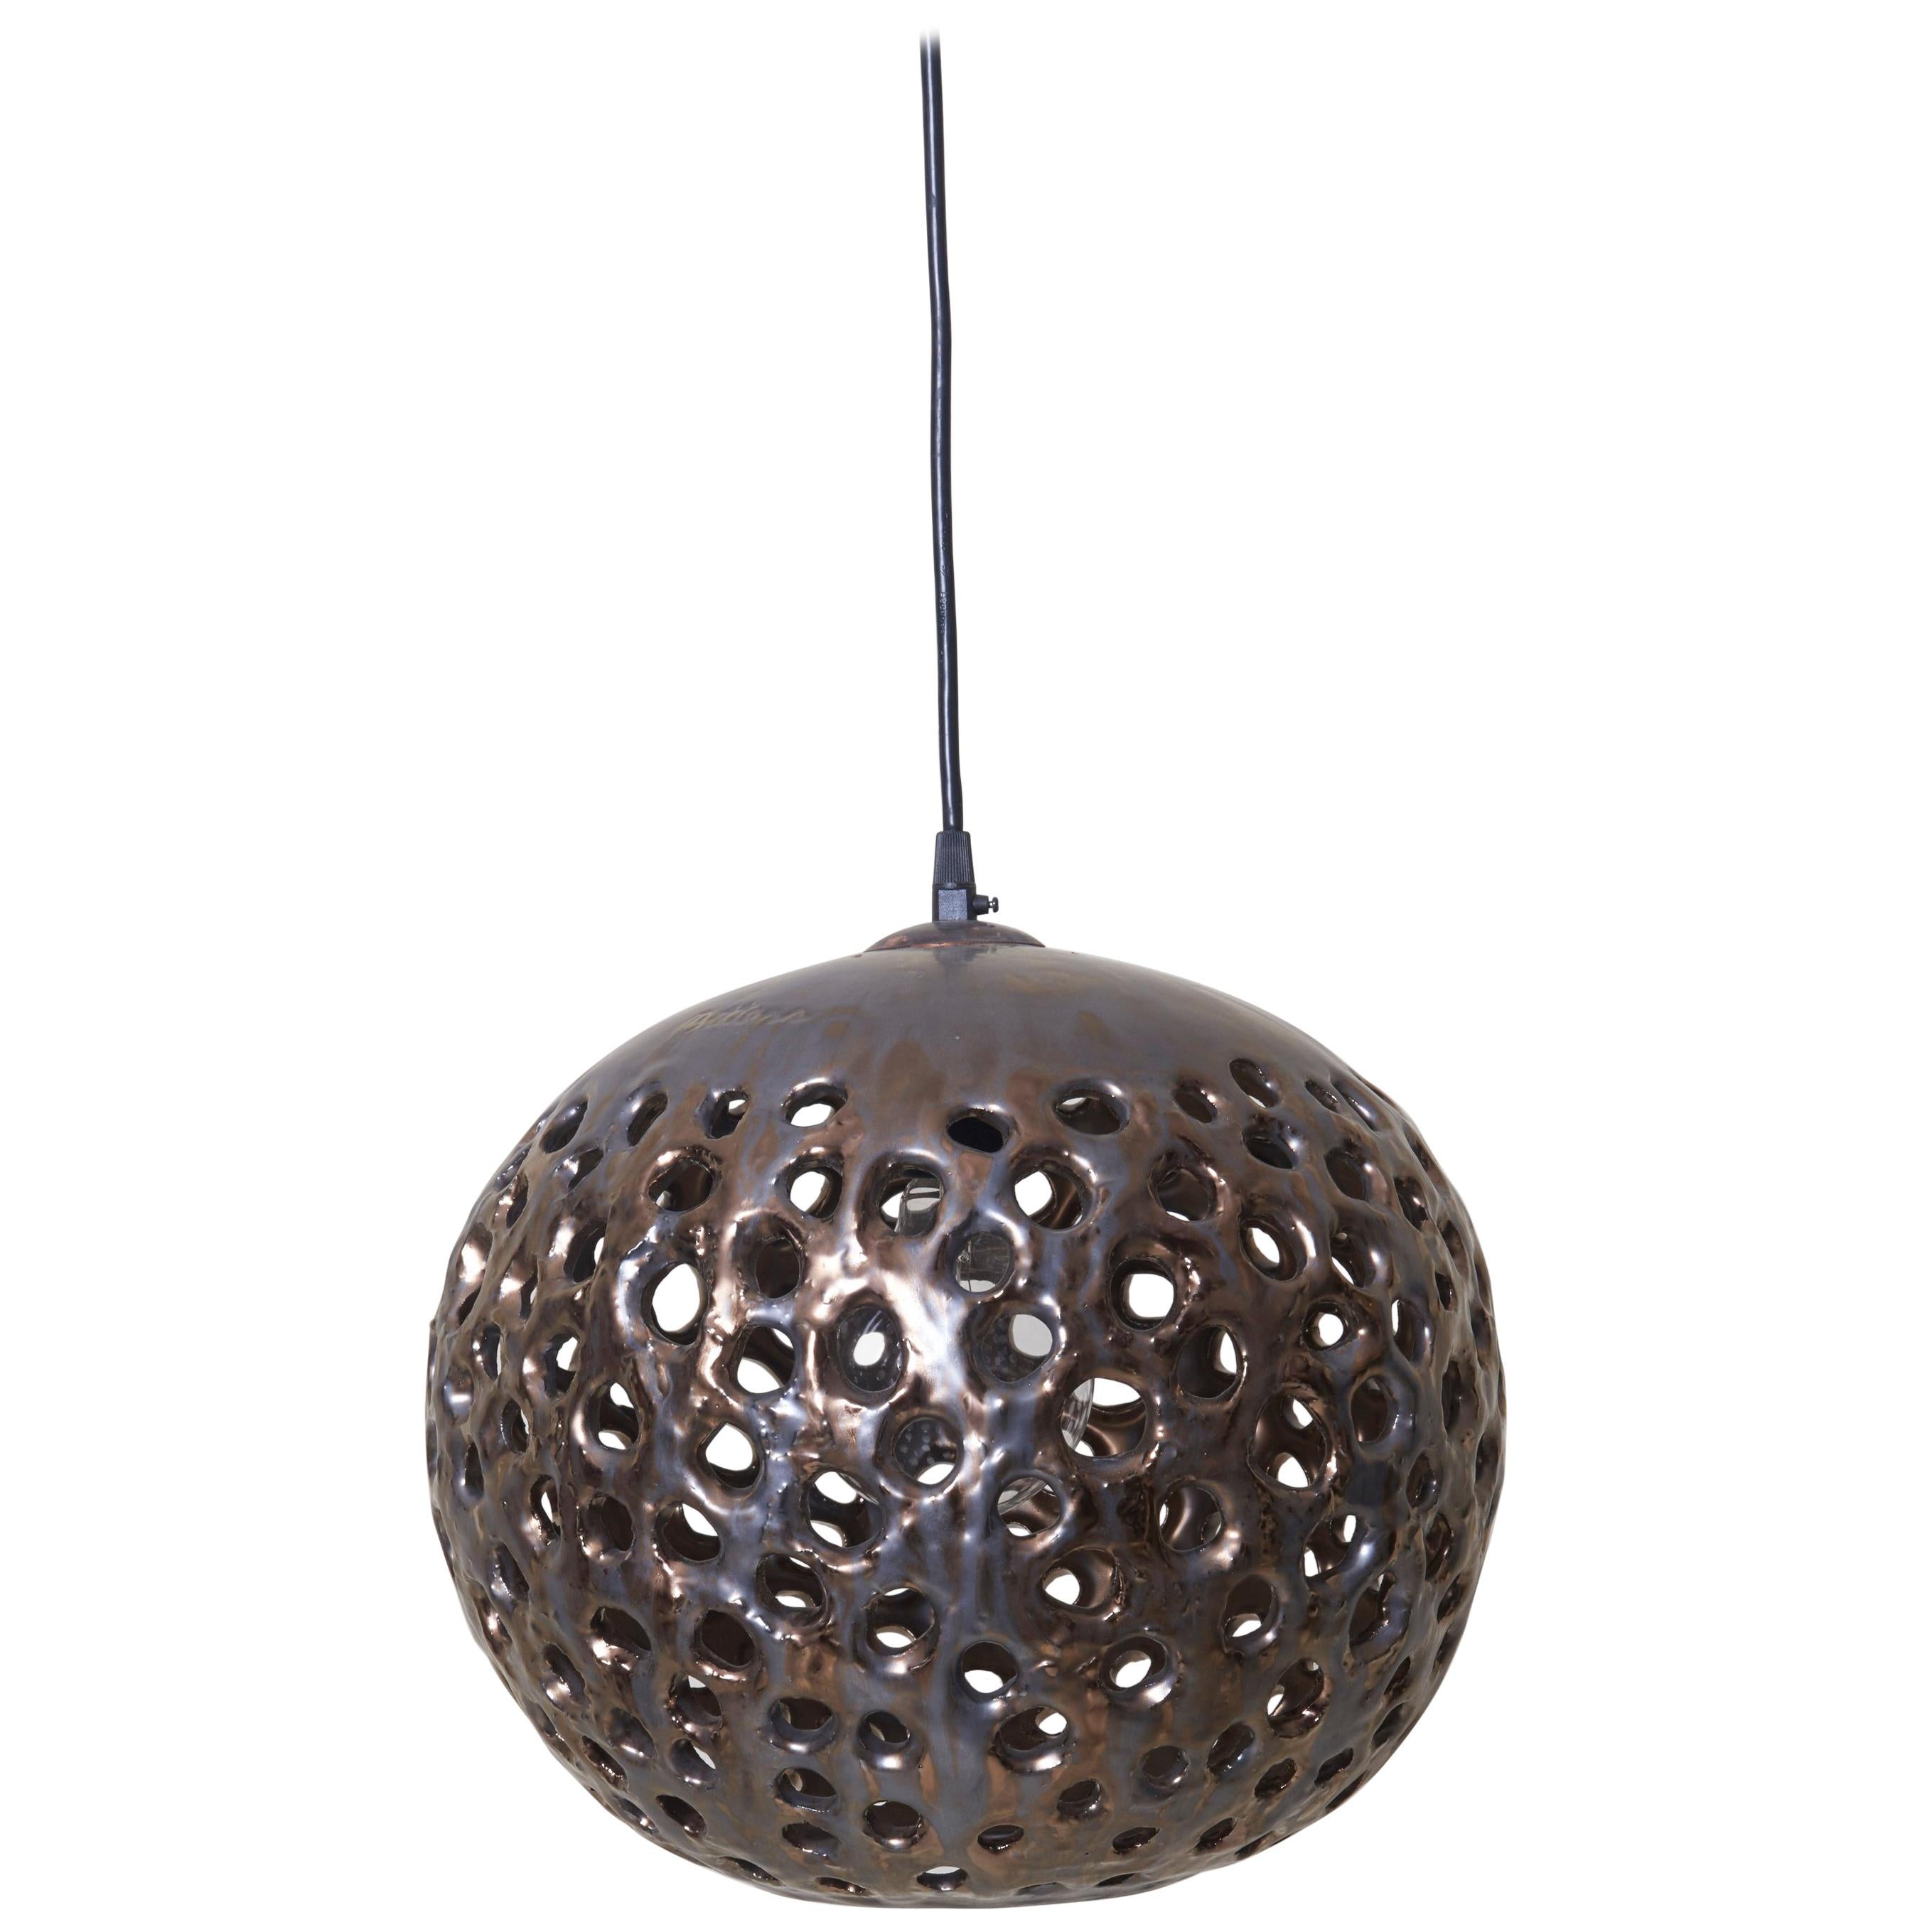 Stan Bitters Ball Lamp in Spray Metal, USA, 2017 For Sale